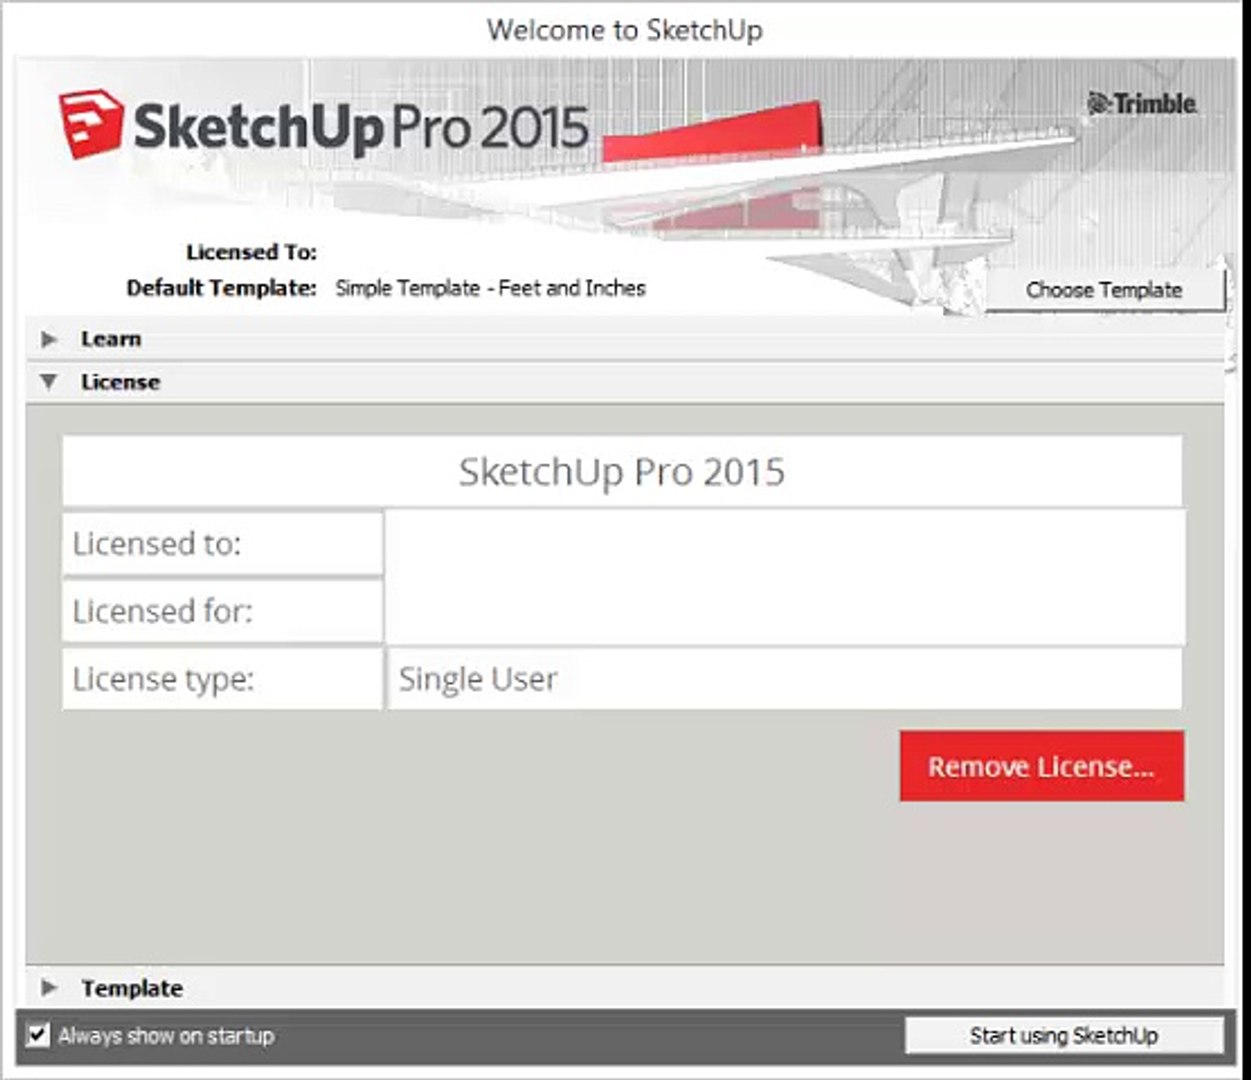 Sketchup pro 2015 license key and authorization number